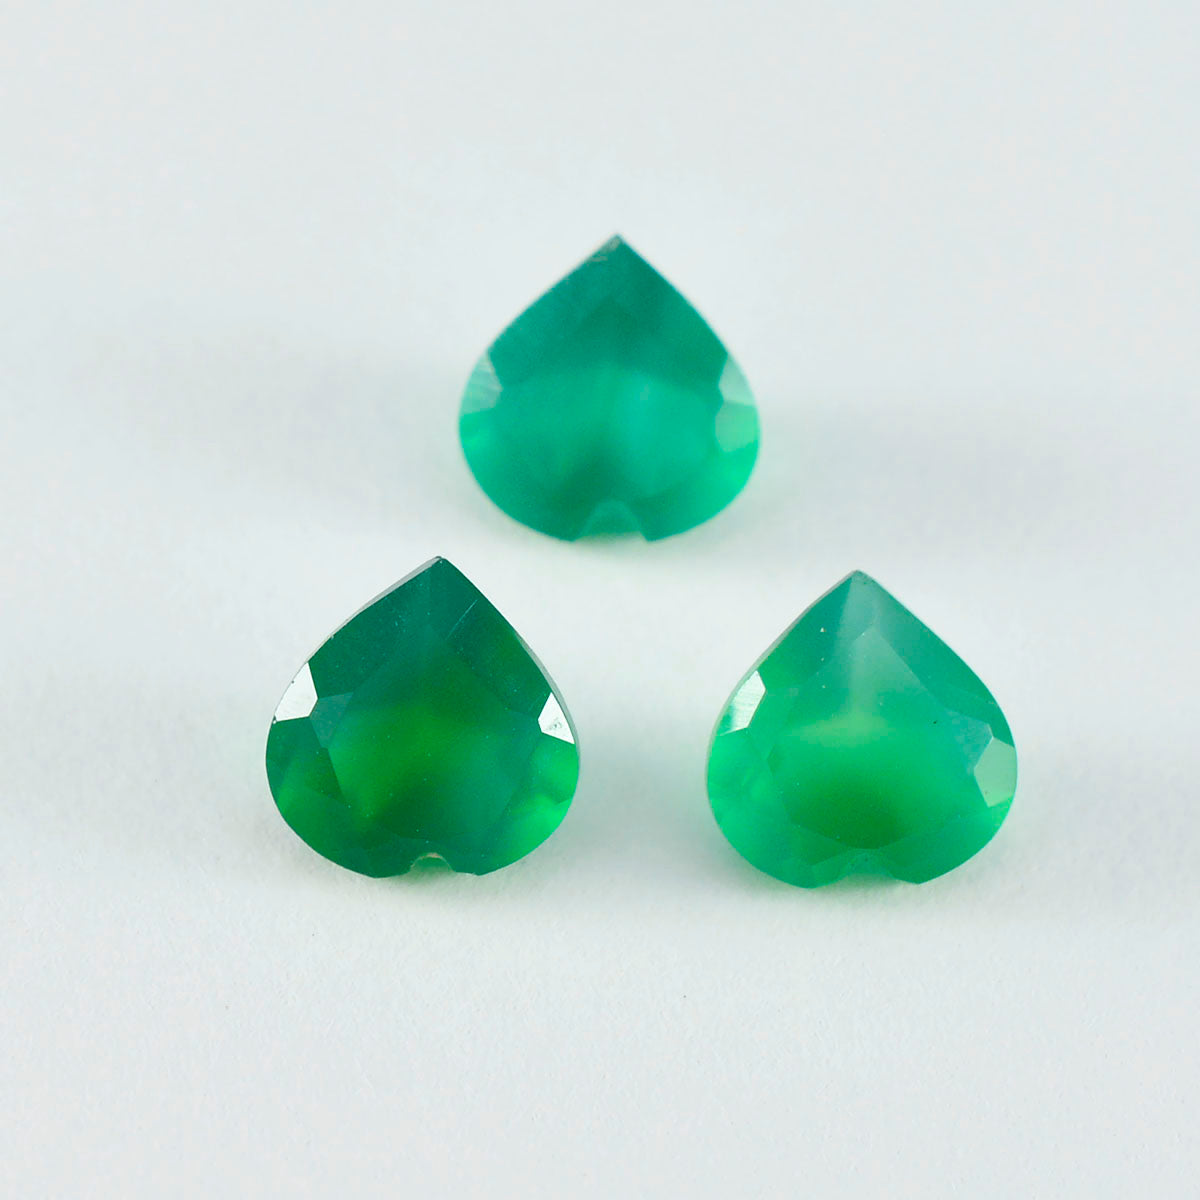 Riyogems 1PC Real Green Onyx Faceted 7x7 mm Heart Shape handsome Quality Gems